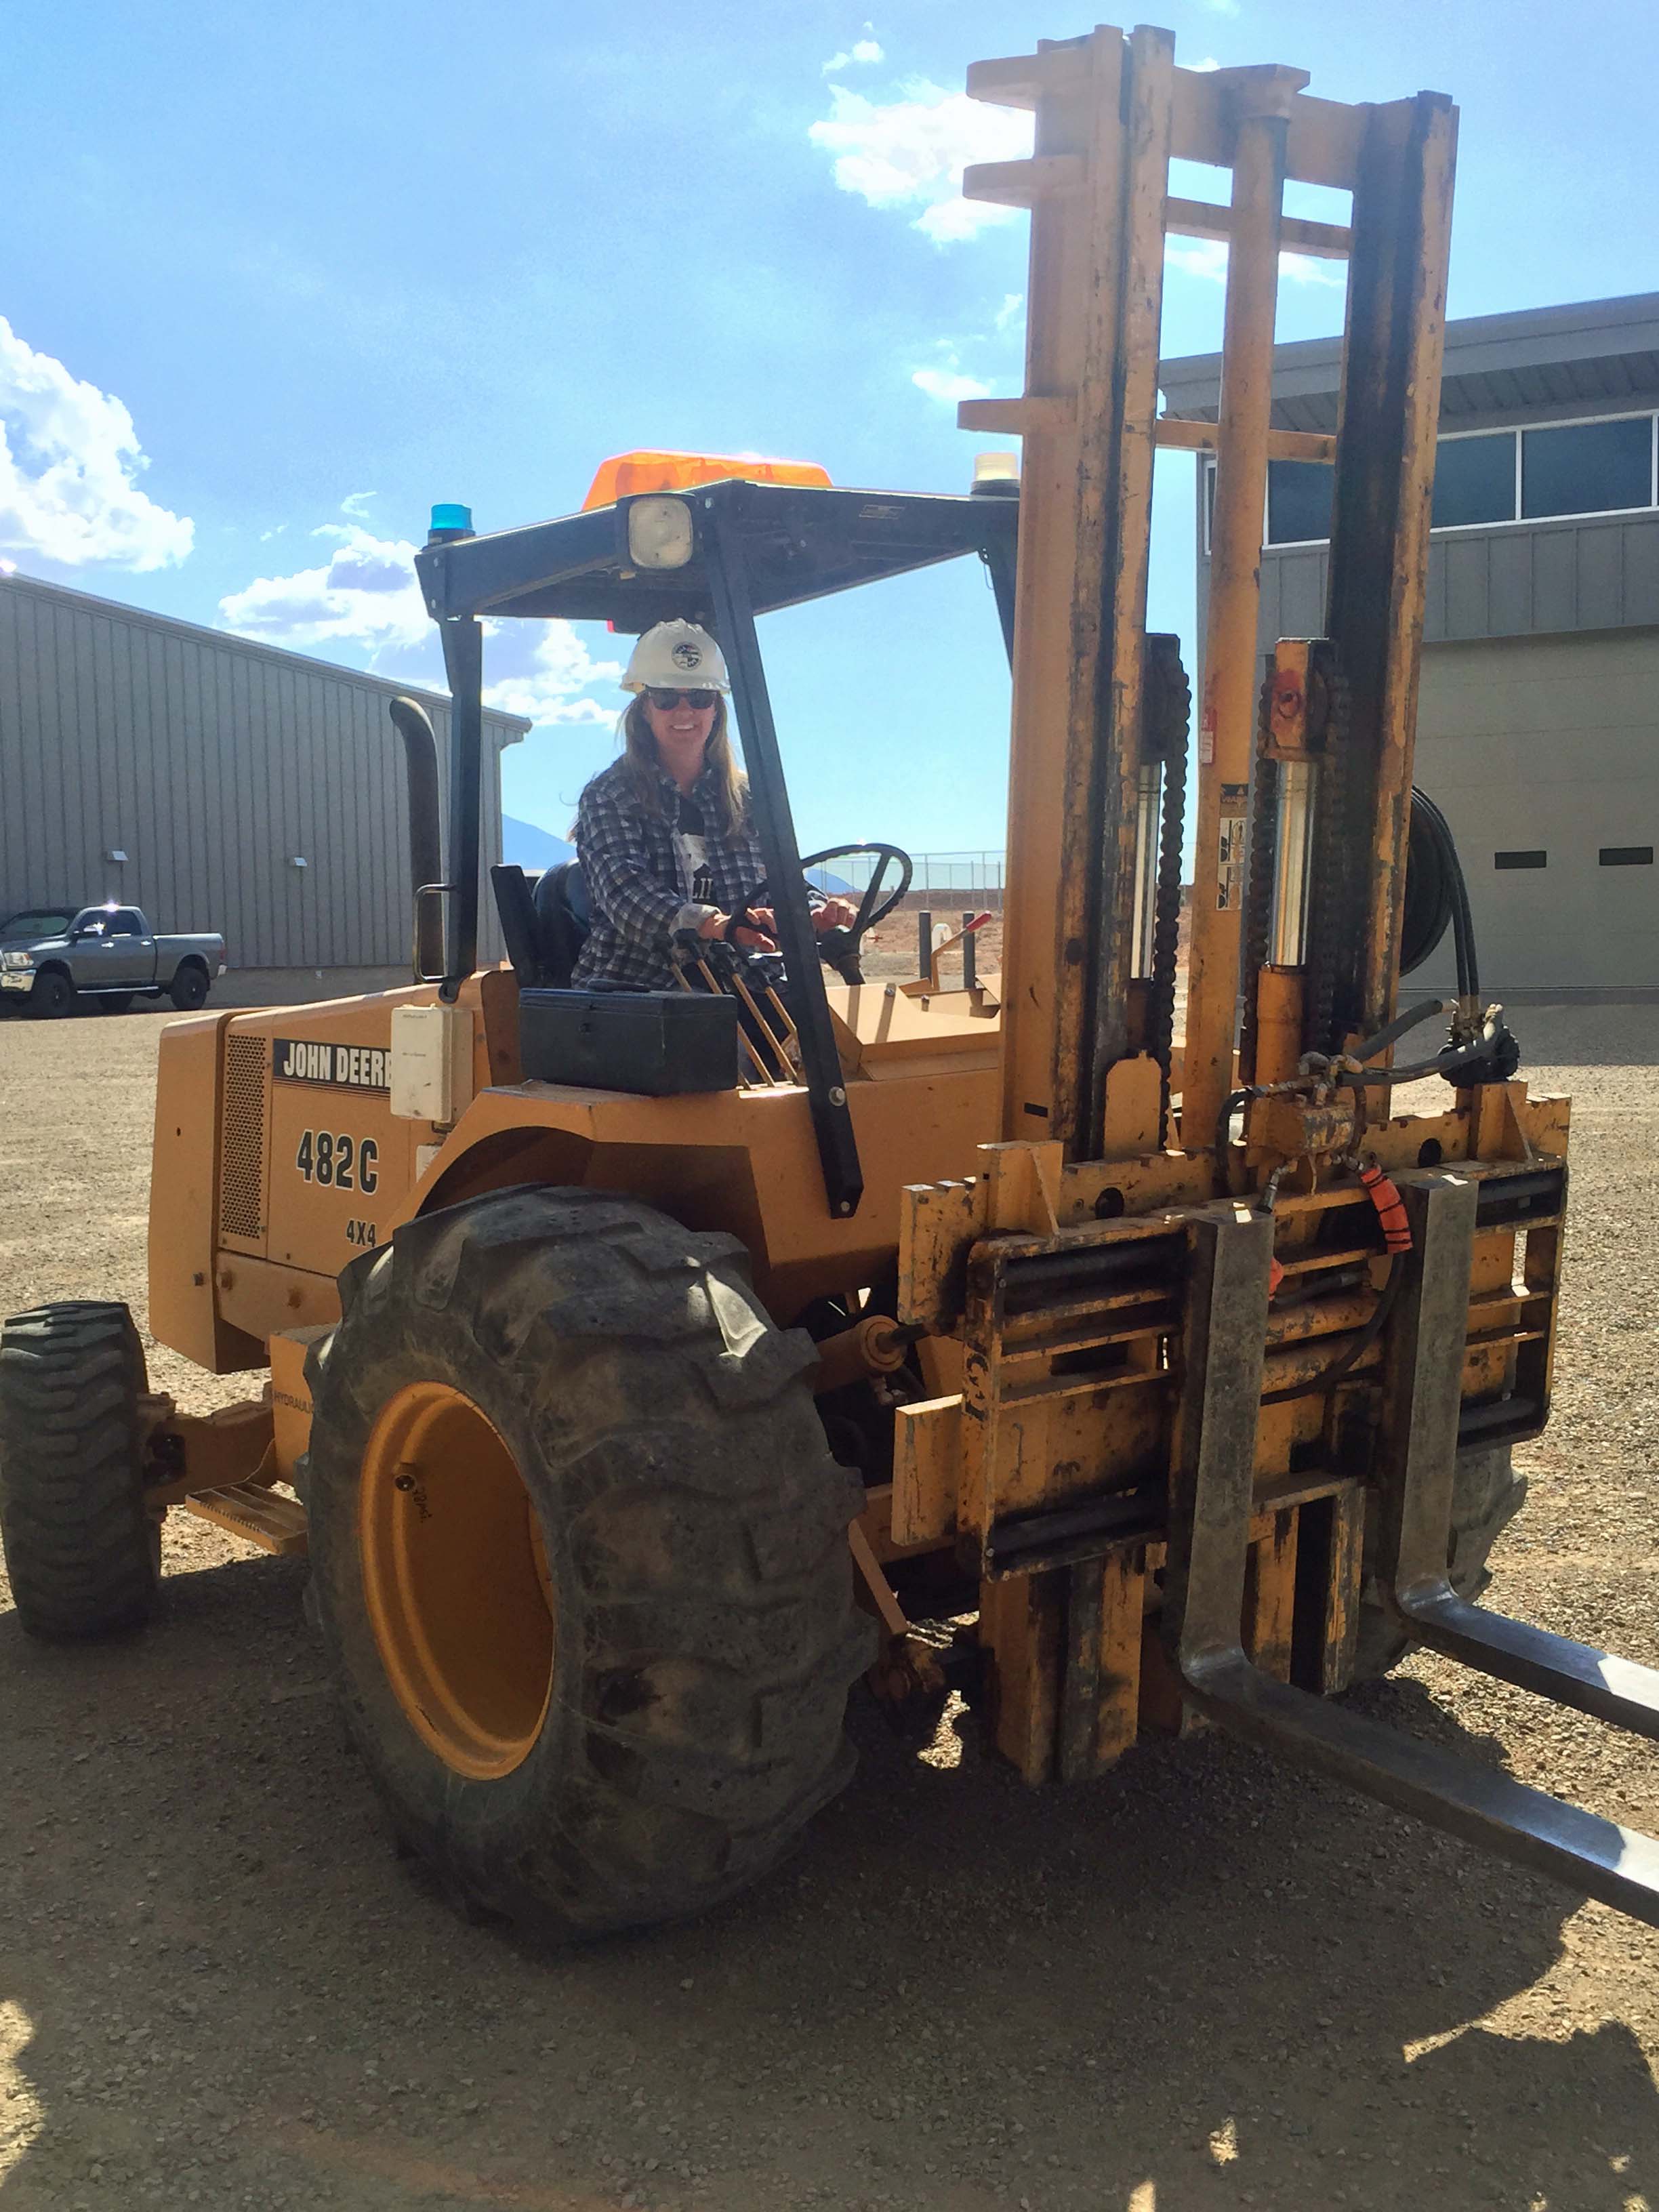 Woman operating forklift